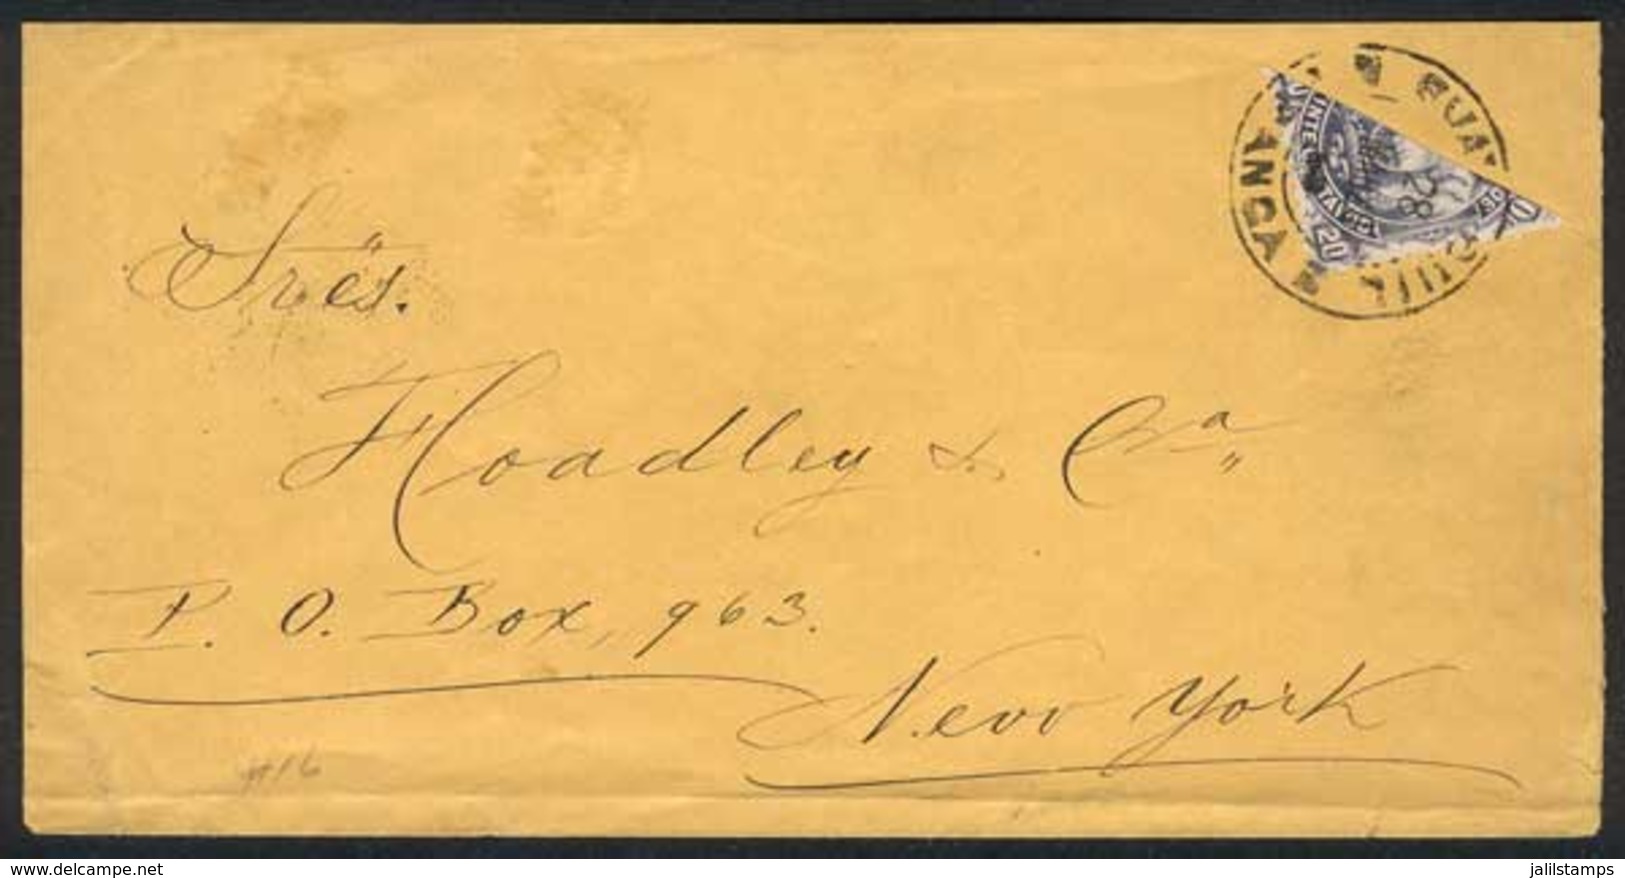 678 ECUADOR: Cover Franked With BISECT 20c. (Sc.16), Sent From Guayaquil To New York On - Equateur